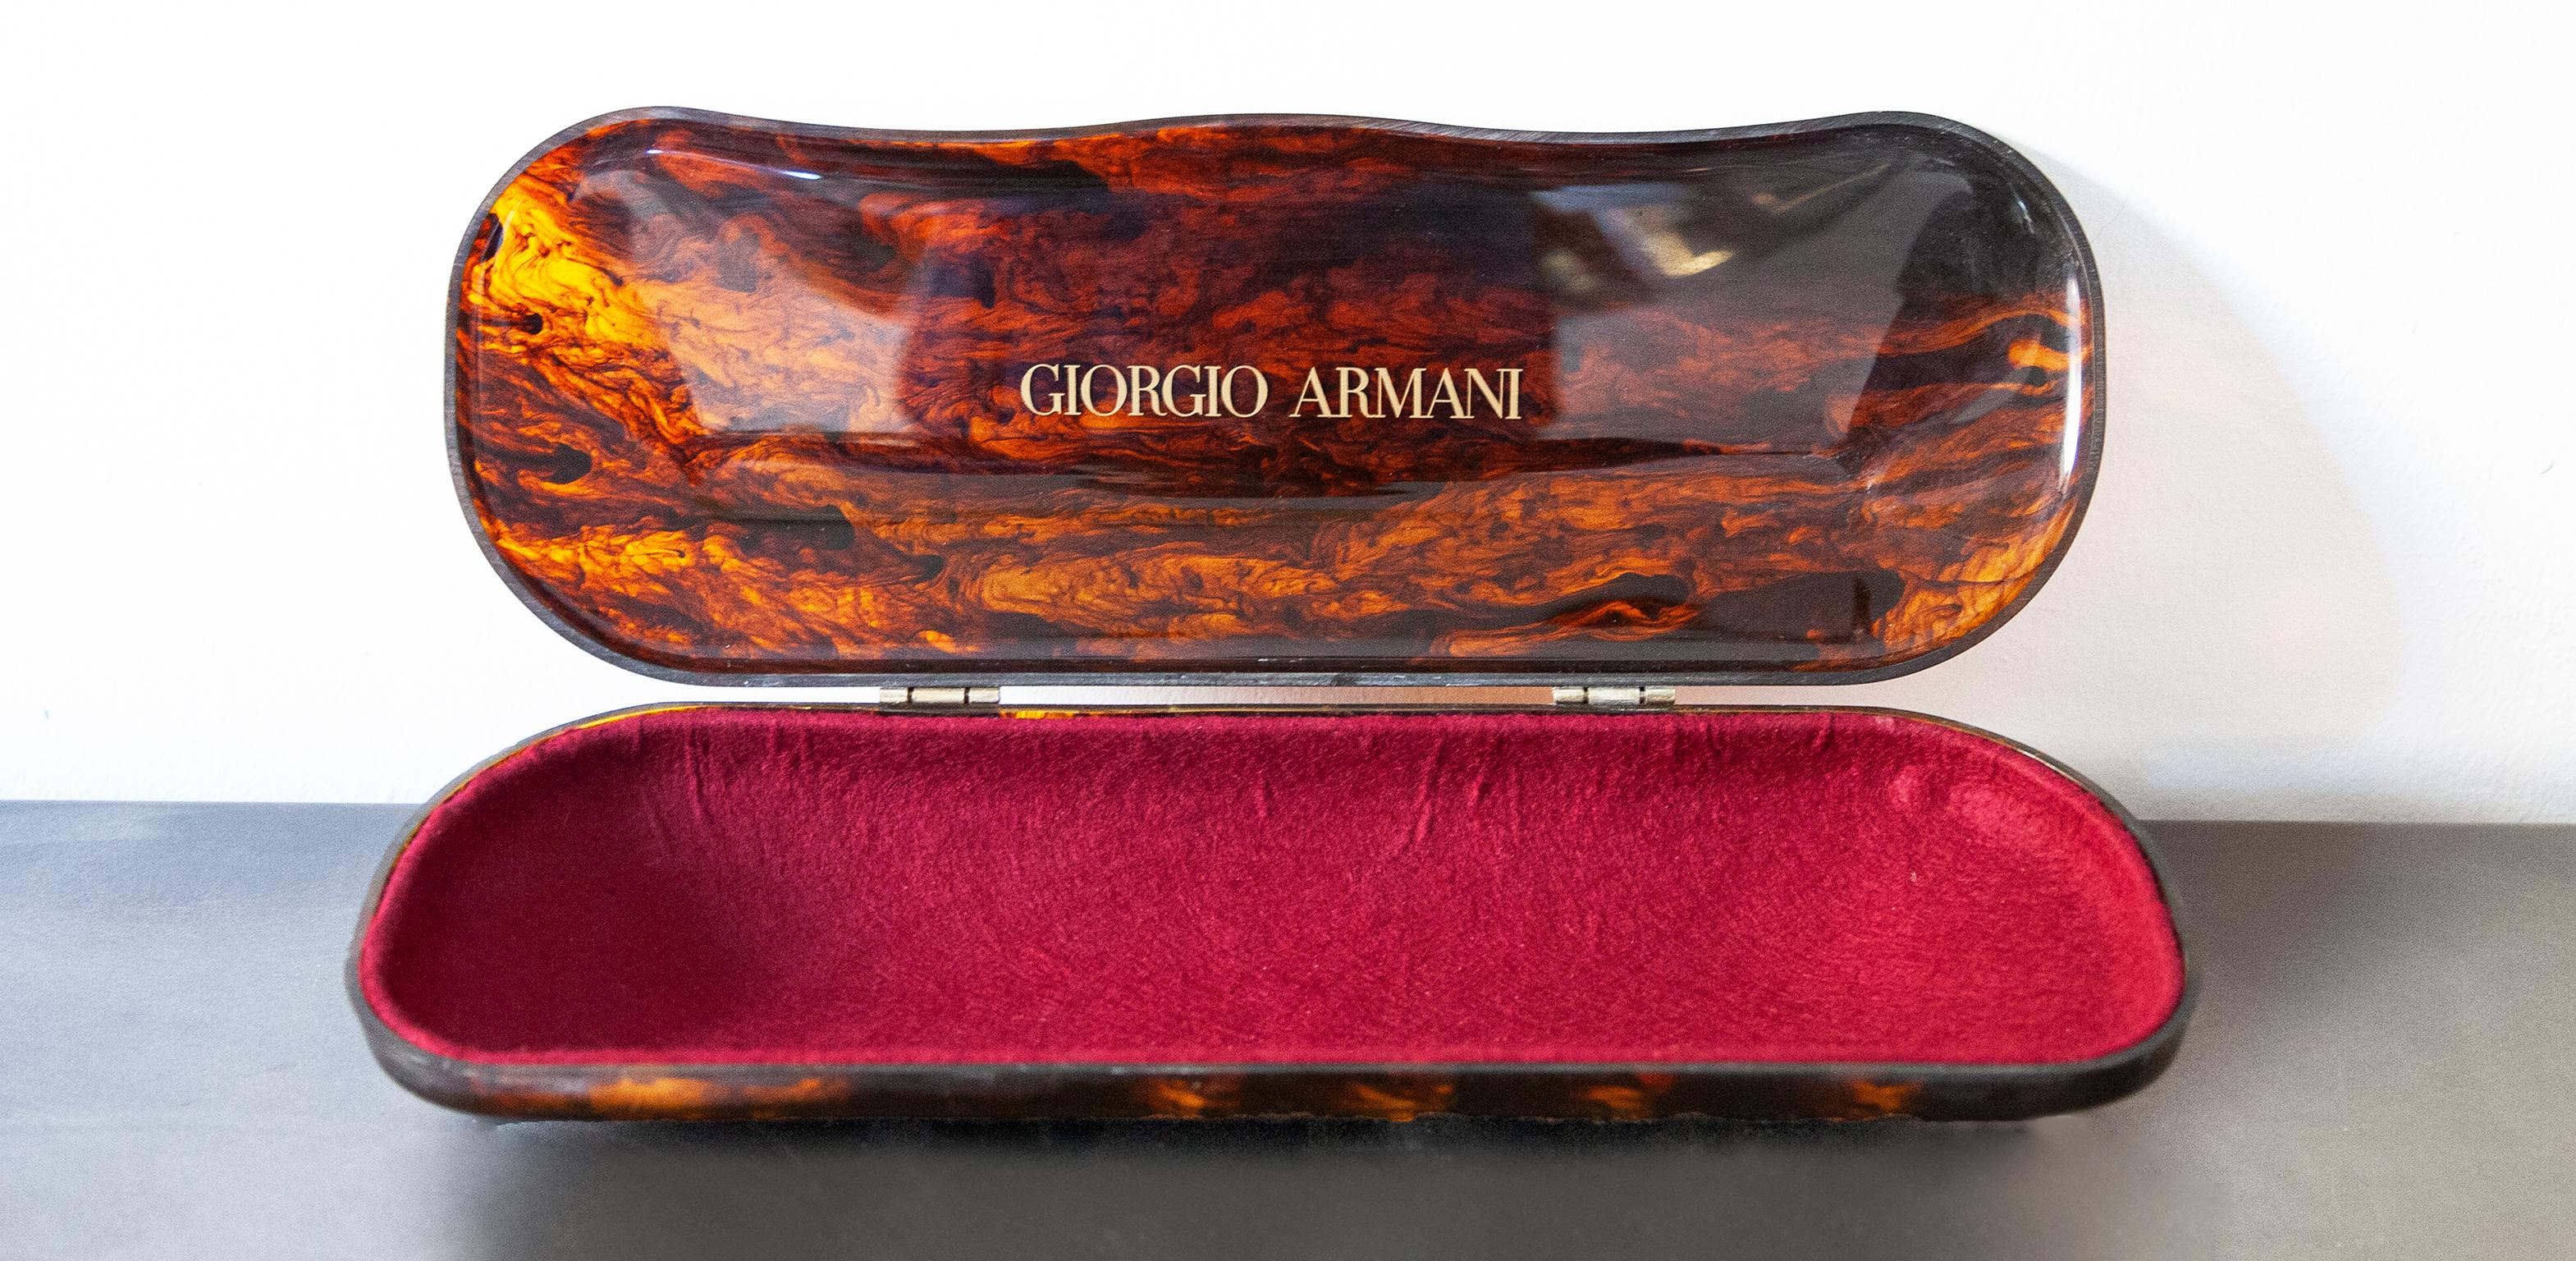 Extra large vintage Giorgio Armani acrylic table box in tiger pattern with a red felt inlay in very good vintage condition.

Measures: 10 H x 46 B x15 D cm.